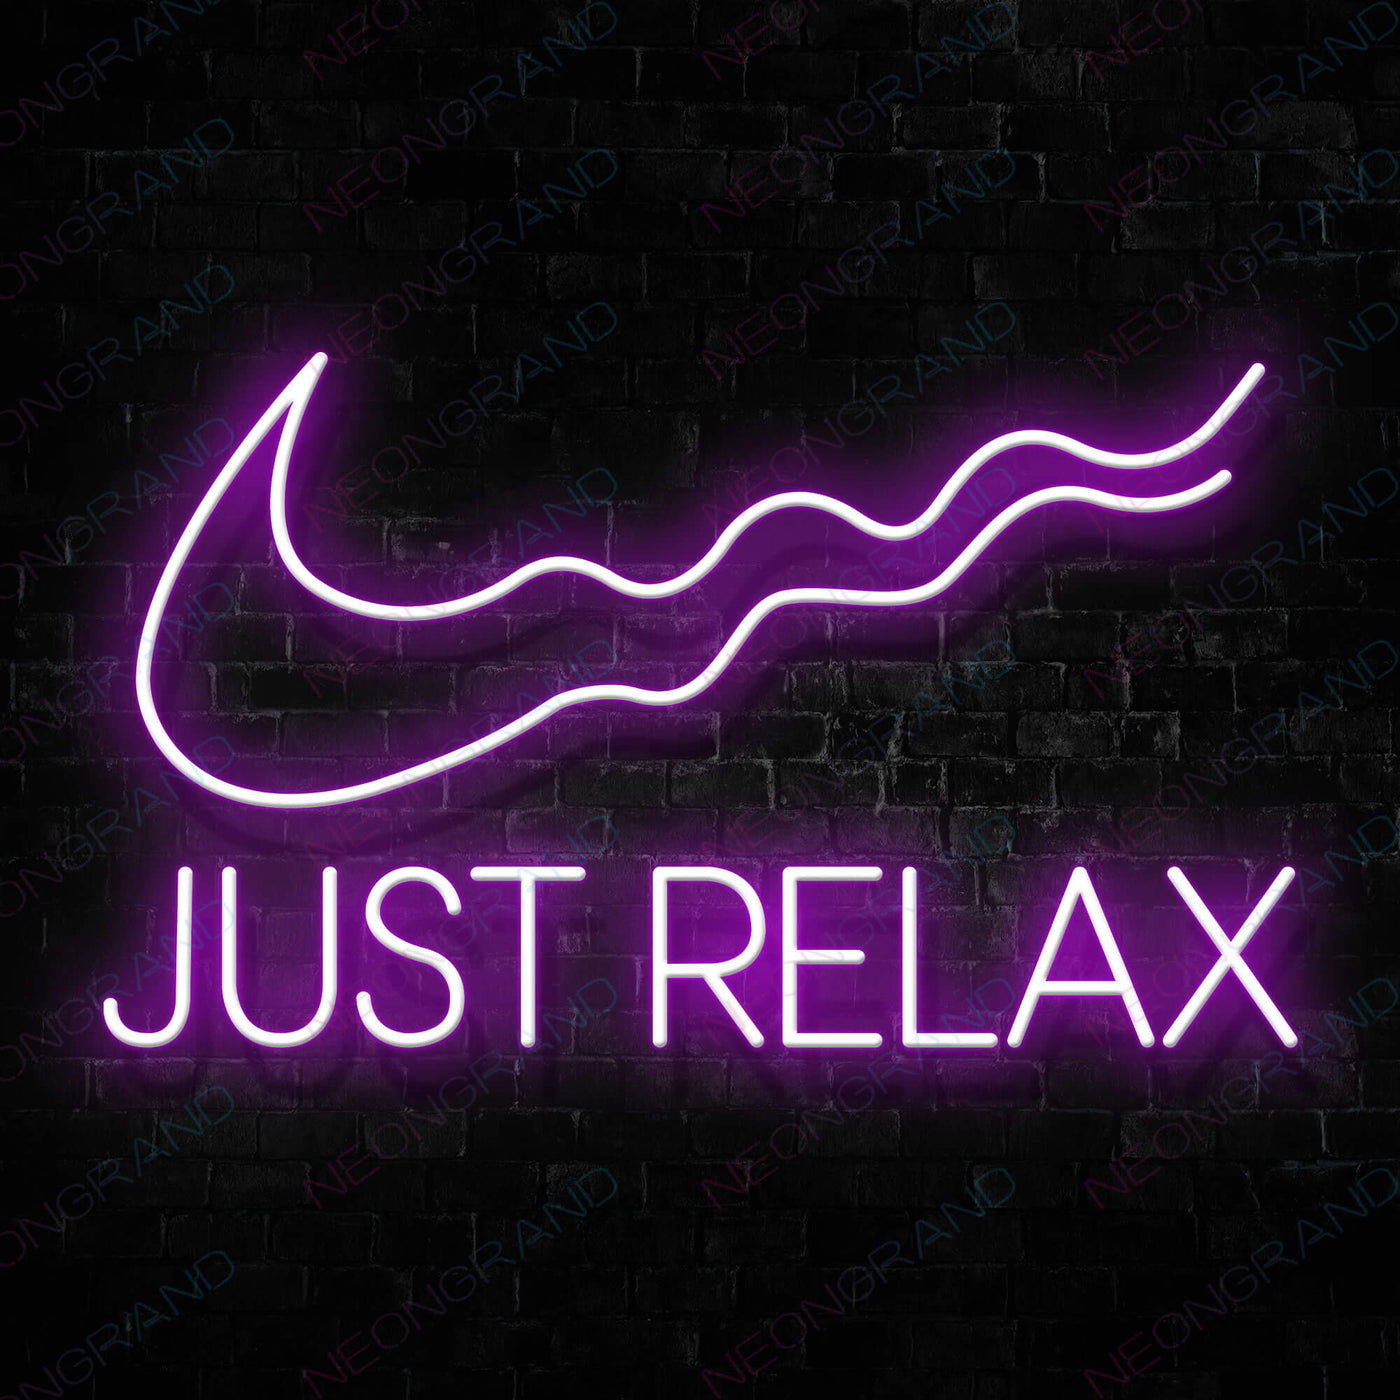 Just Relax Neon Sign Led Light purple